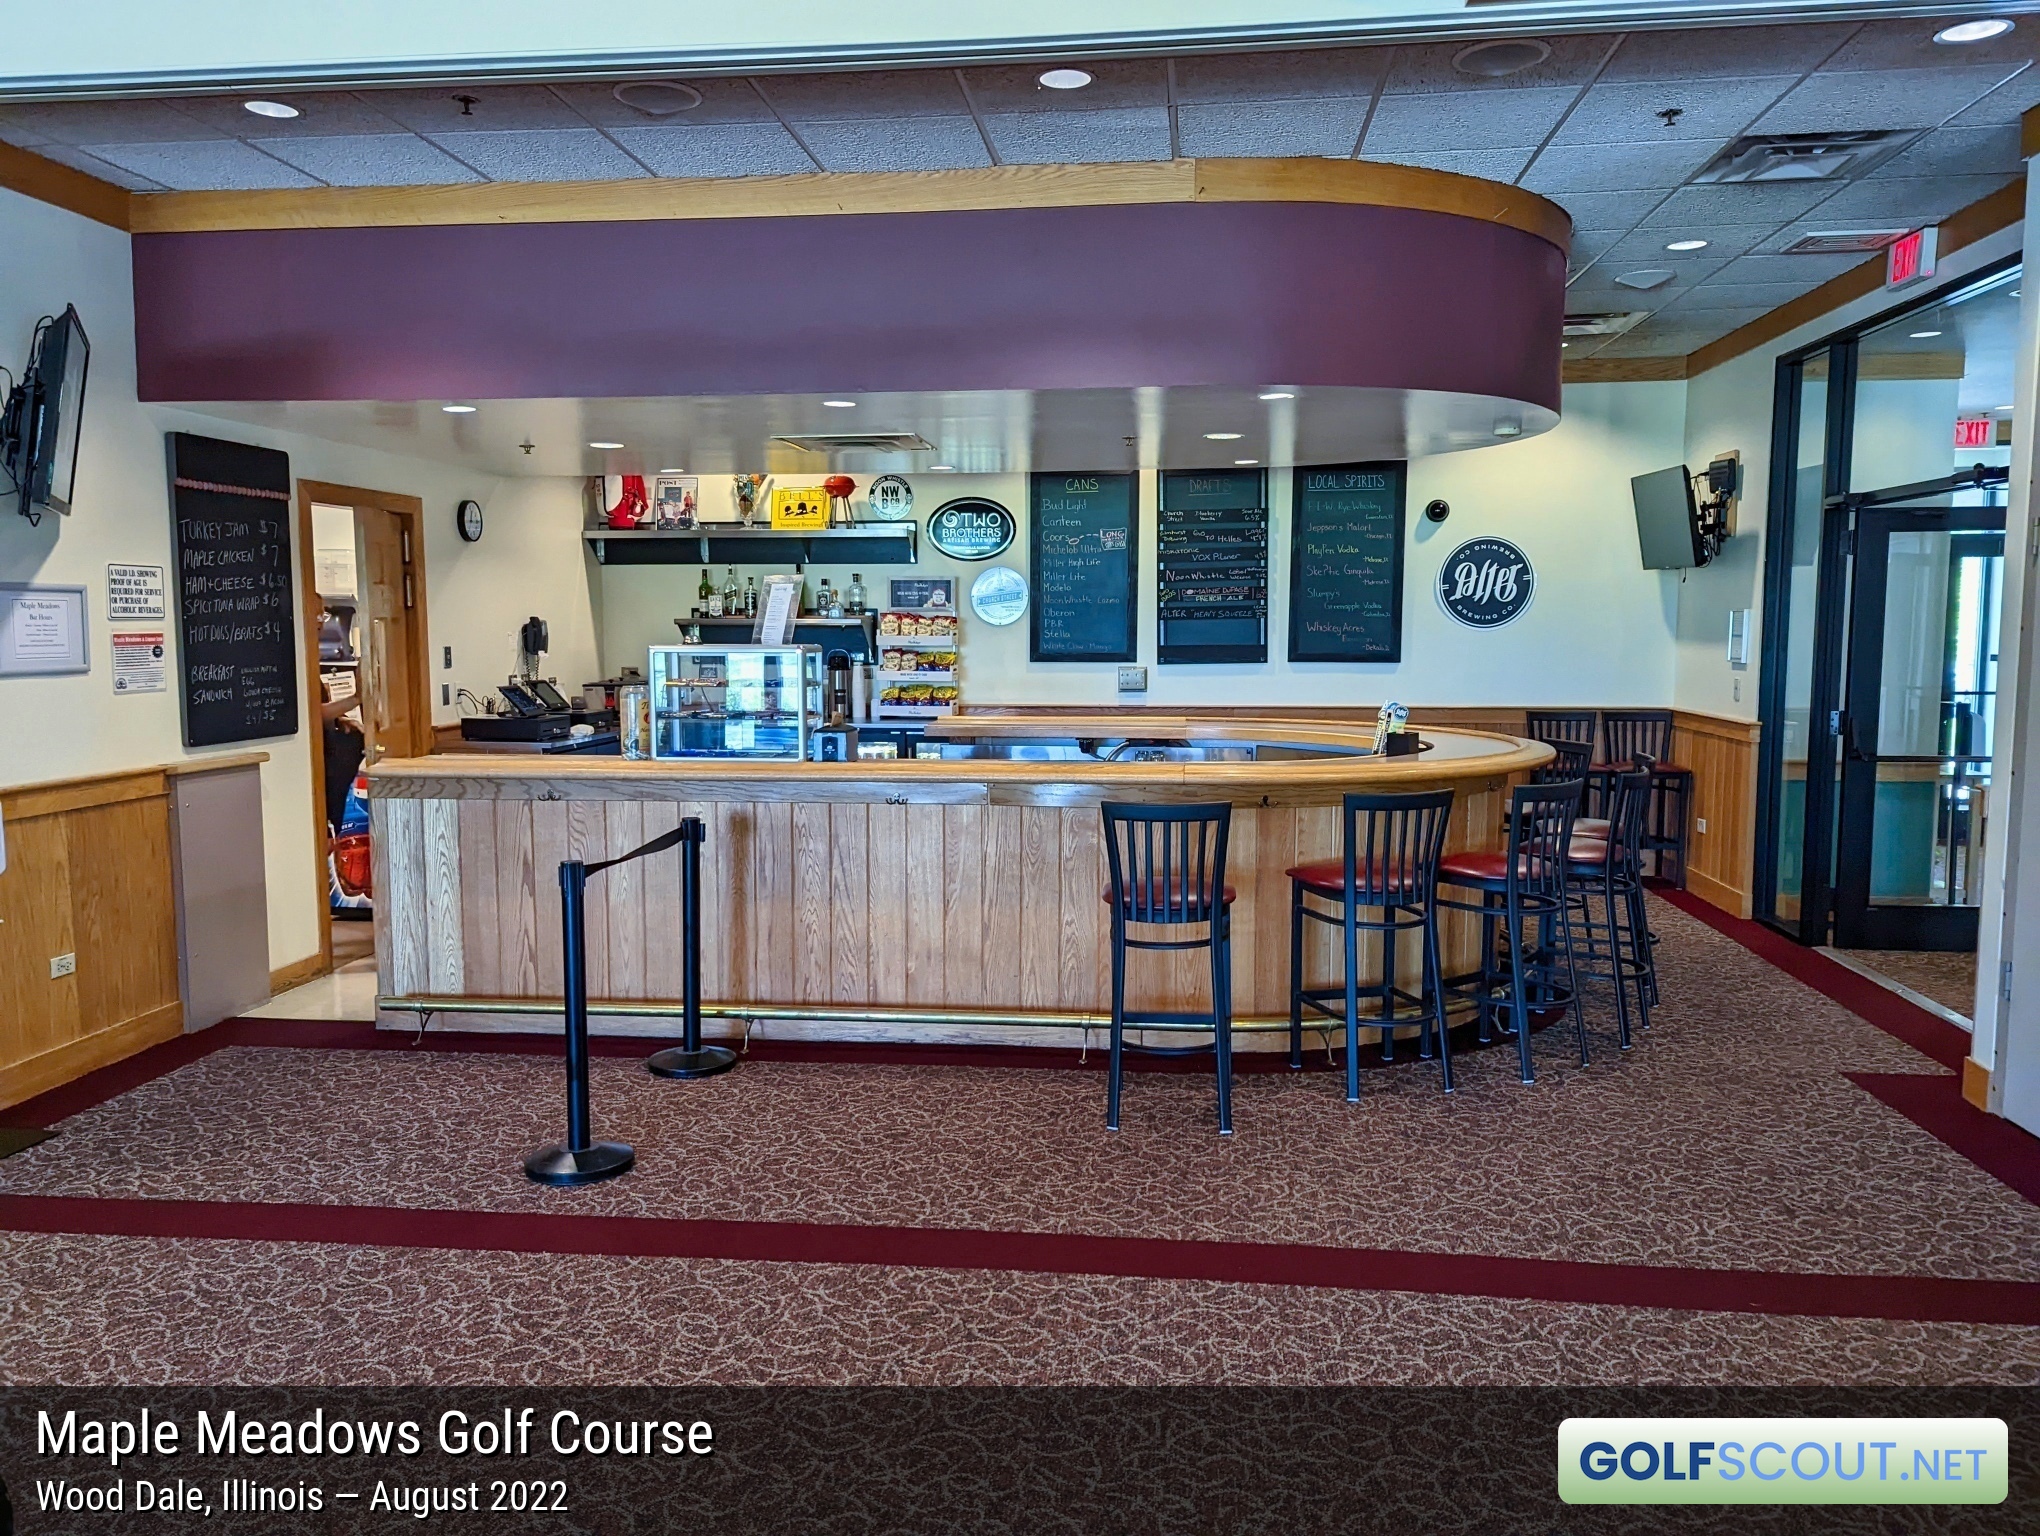 Photo of the restaurant at Maple Meadows Golf Course in Wood Dale, Illinois. 